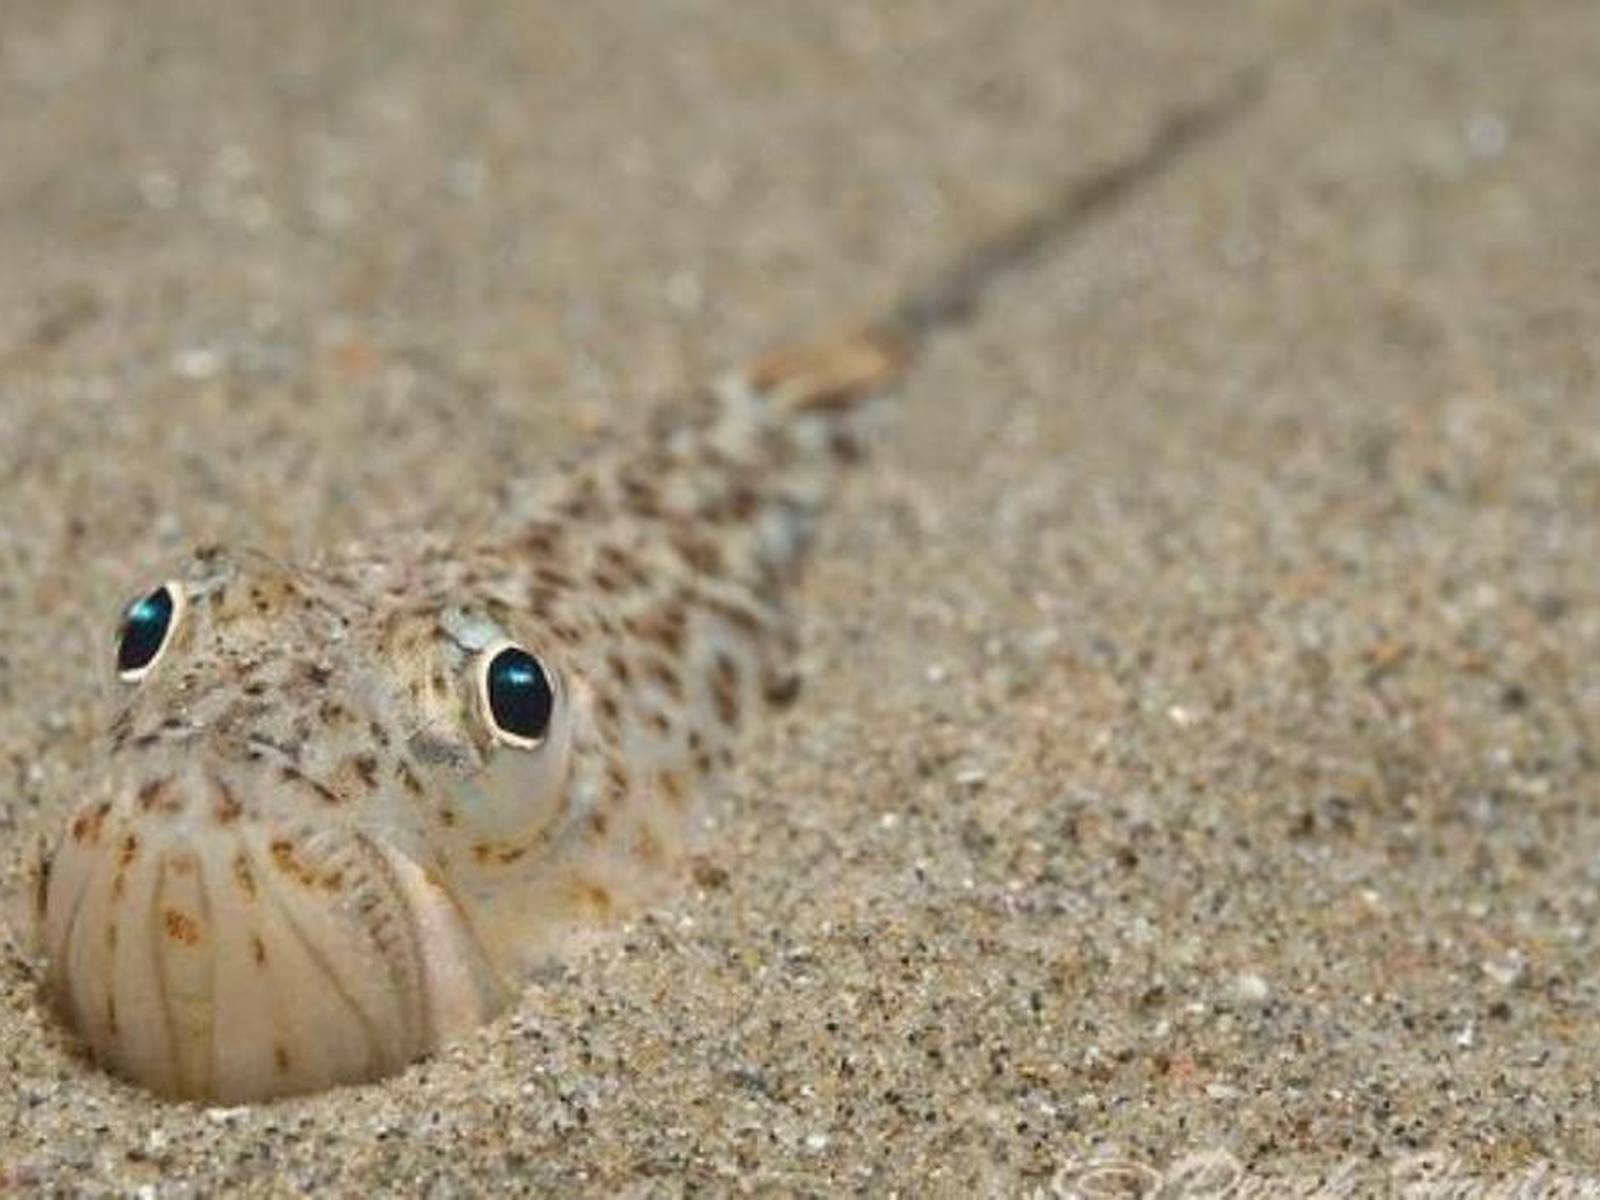 Warning to beach-goers over venomous weever fish hiding in the